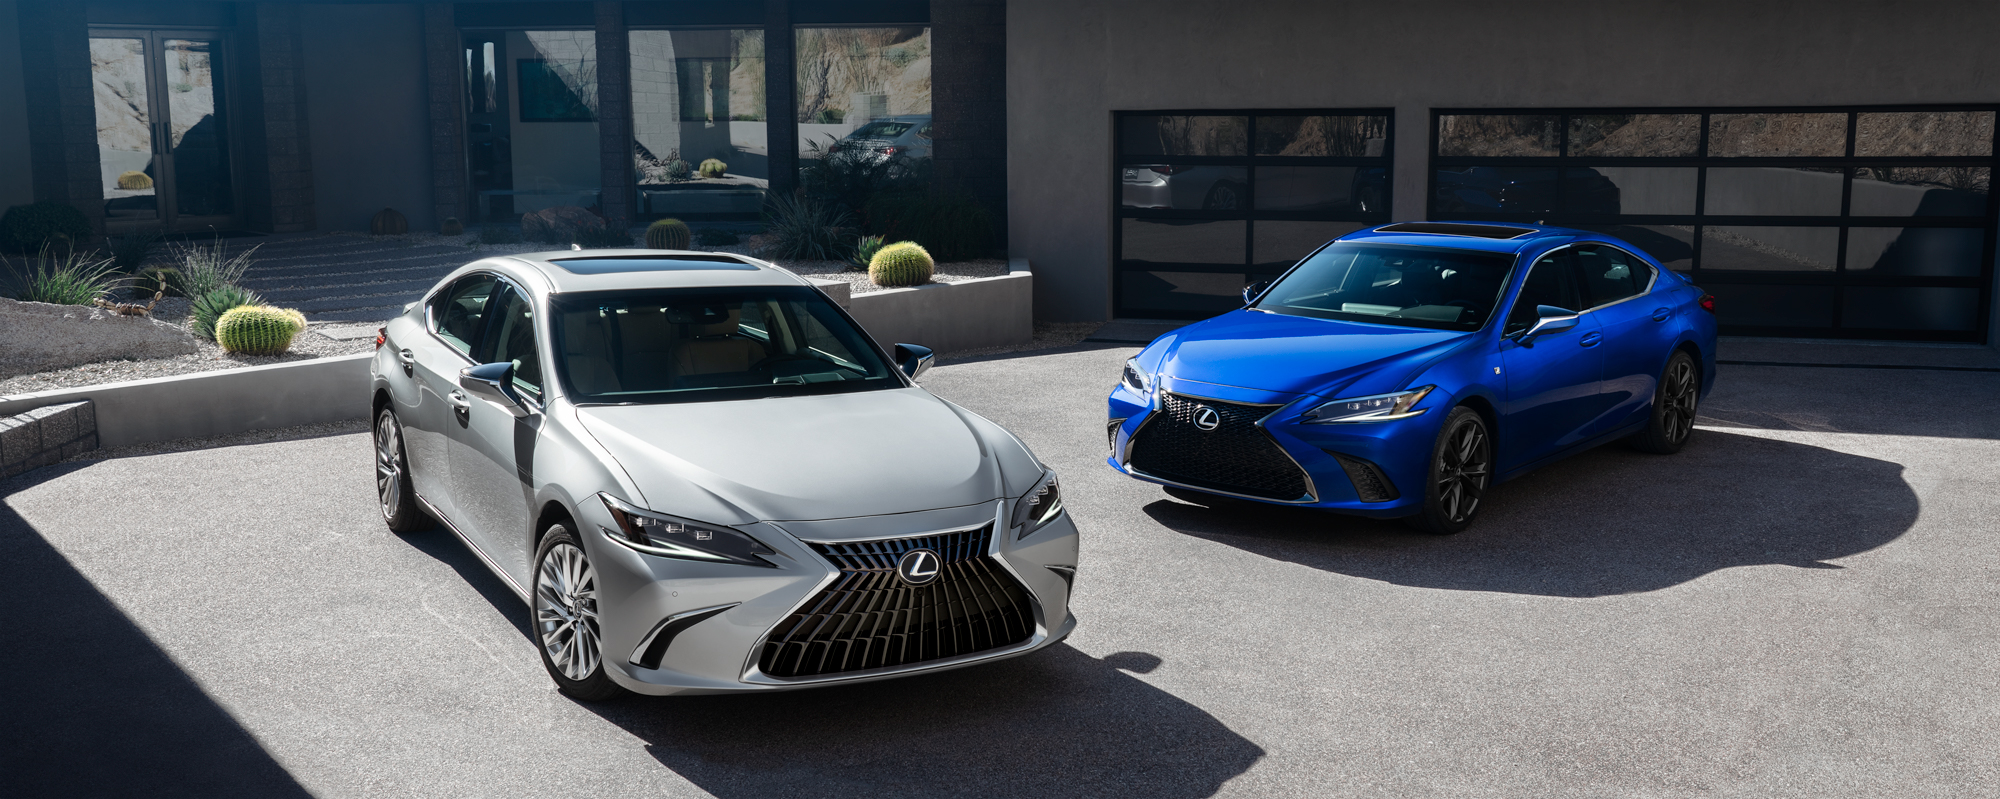 Exterior of the Lexus ES Hybrid shown in Iridium and the ES F SPORT Handling shown in Ultrasonic Blue Mica 2.0.